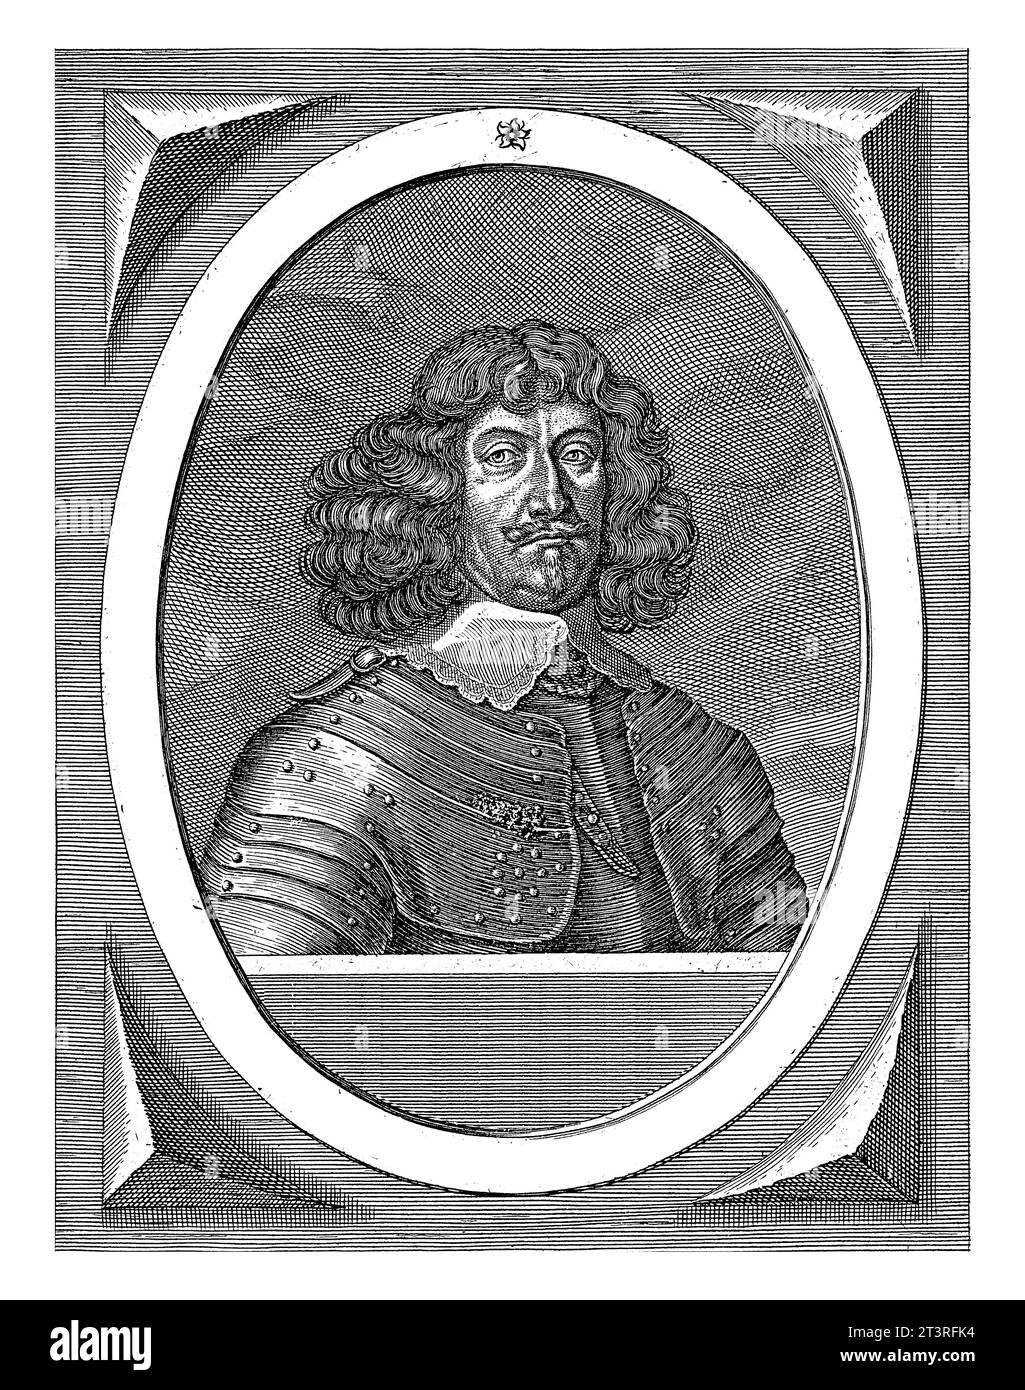 Portrait of Wenzel Czabeliczki von Sauticz, Friedrich van Hulsen, 1649 Bust of Wenzel Czabeliczki von Sauticz, to the right in an oval with edge lette Stock Photo